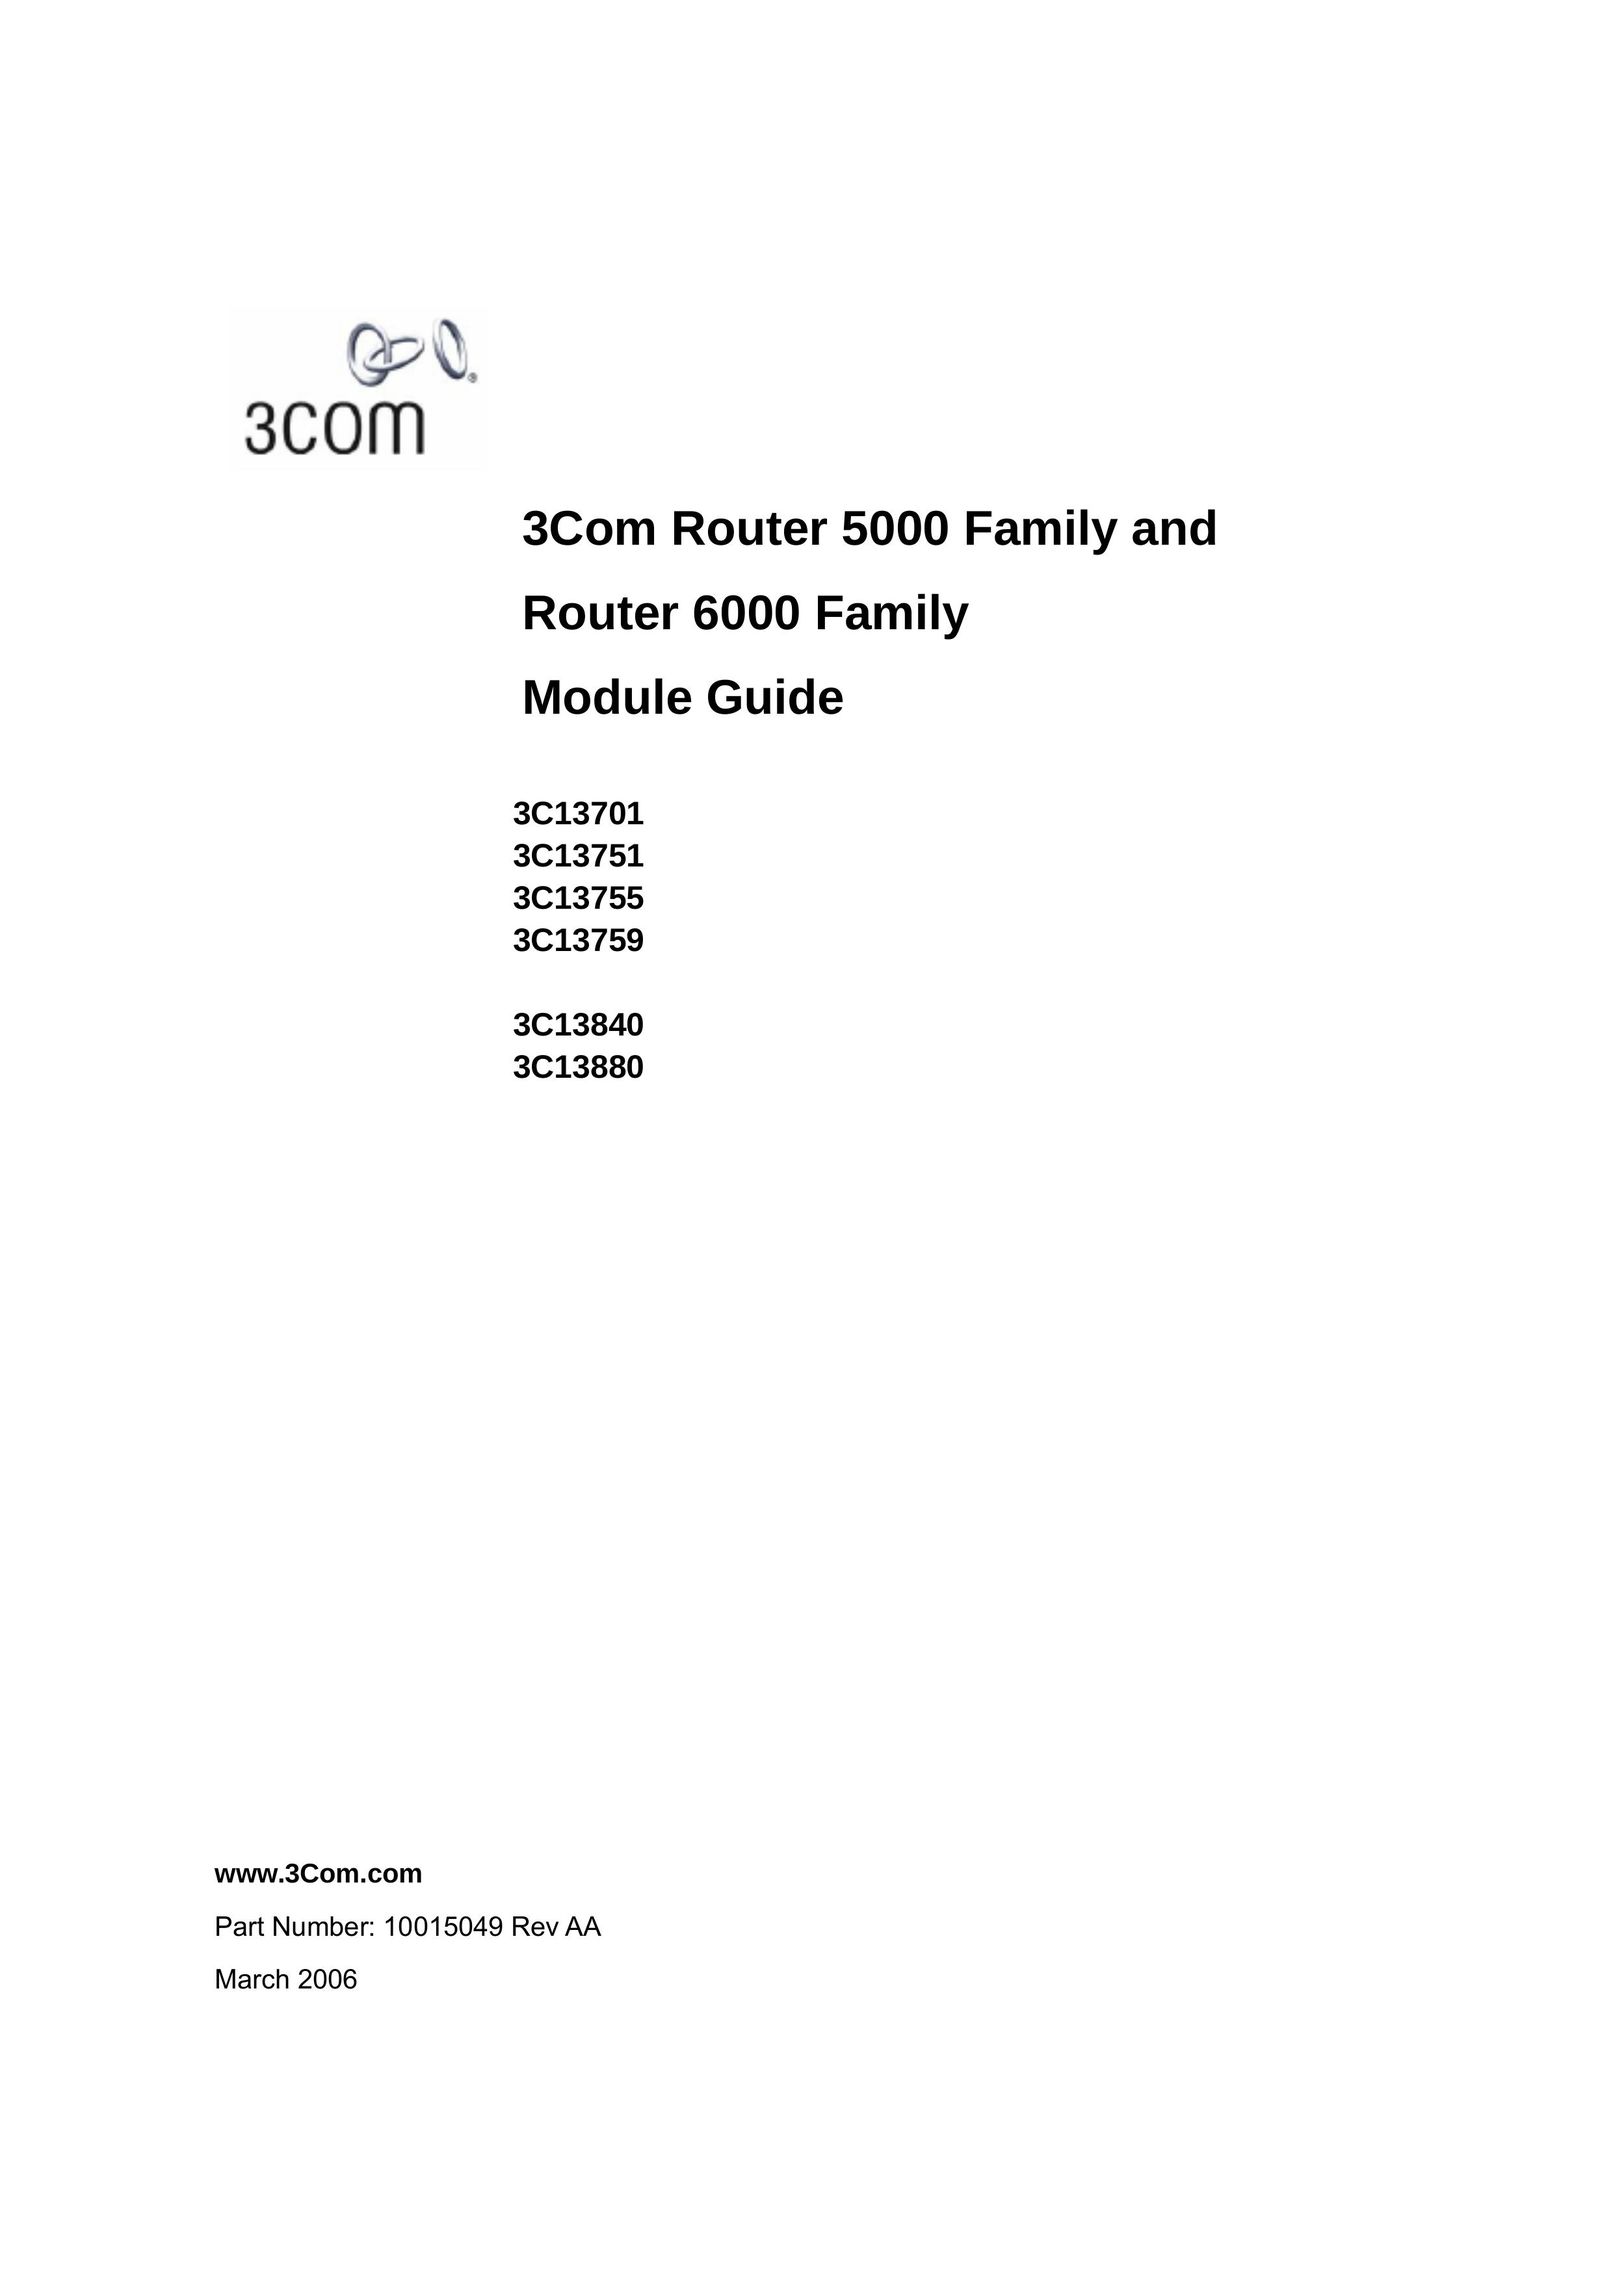 3Com 3C13759 Network Router User Manual